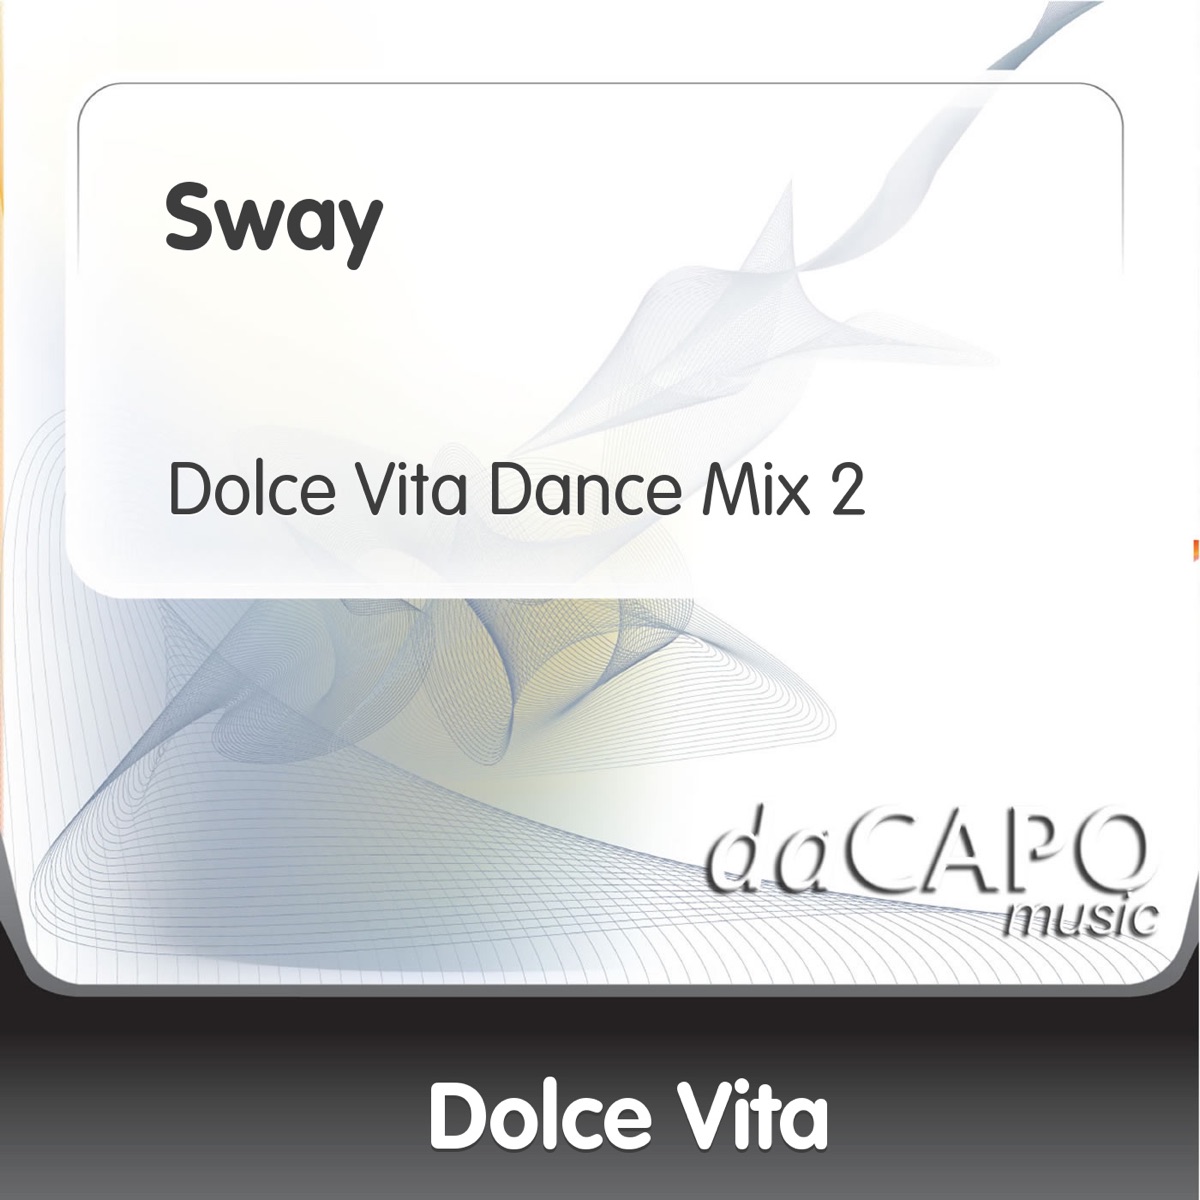 Sway (Dolce Cuba Mix) - Single by Dolce Vita on Apple Music